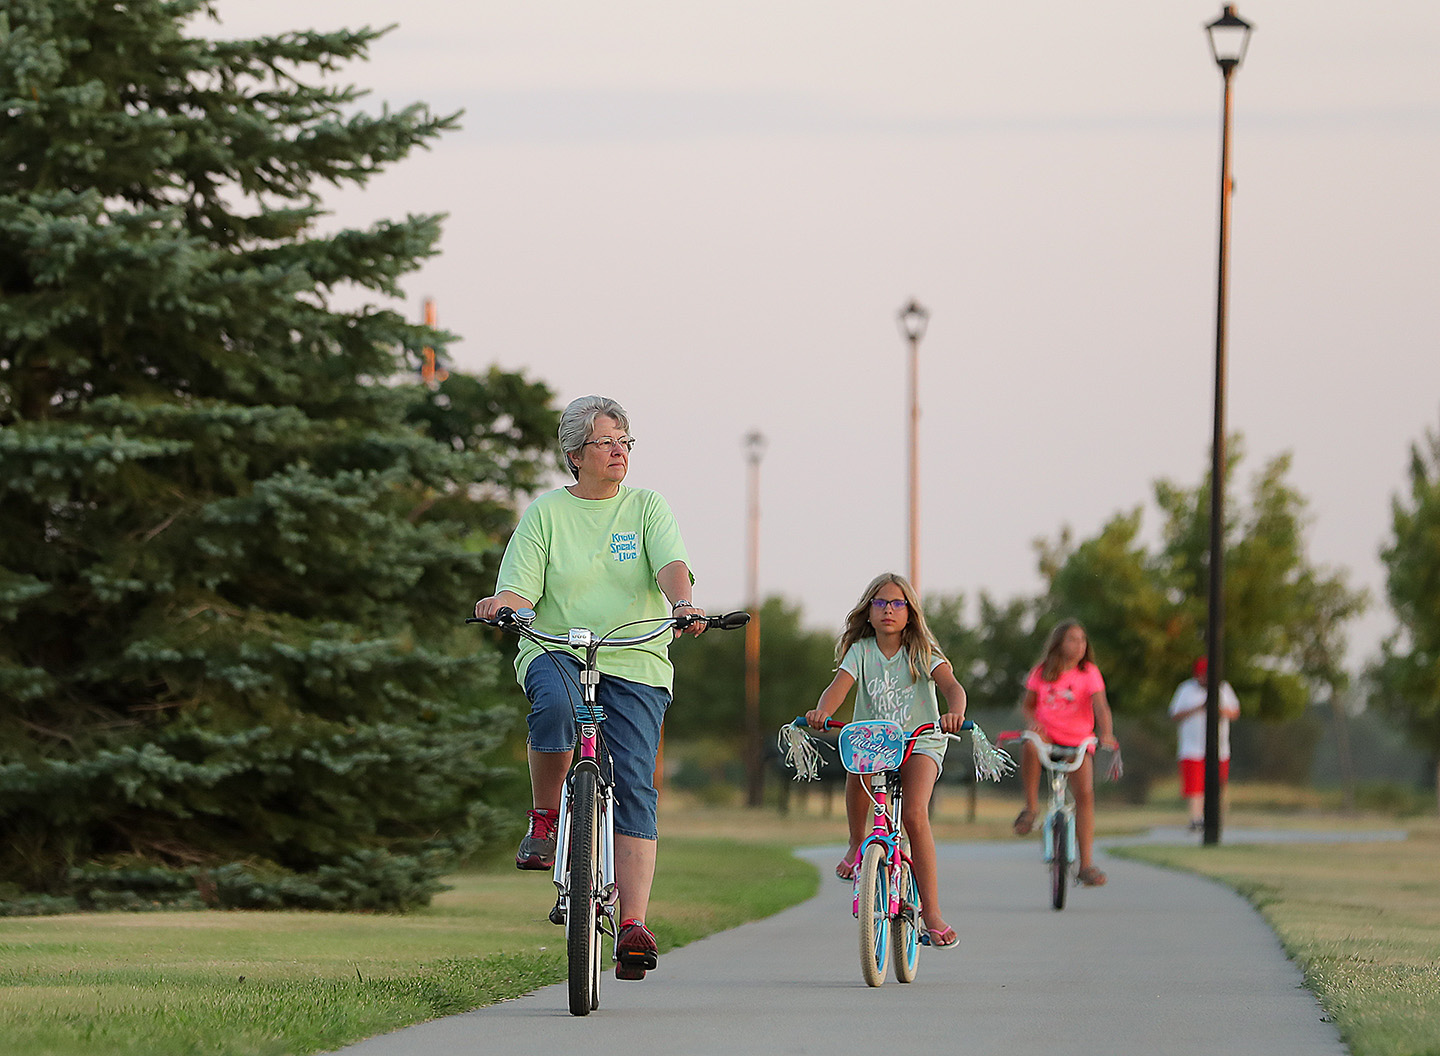 Bicycling is a fun and easy way for people of all ages to get more exercise. The Building Healthy Families program focuses on physical activity for the whole family, as well as proper nutrition and modifying unhealthy behaviors. (Photo by Erika Pritchard, UNK Communications)